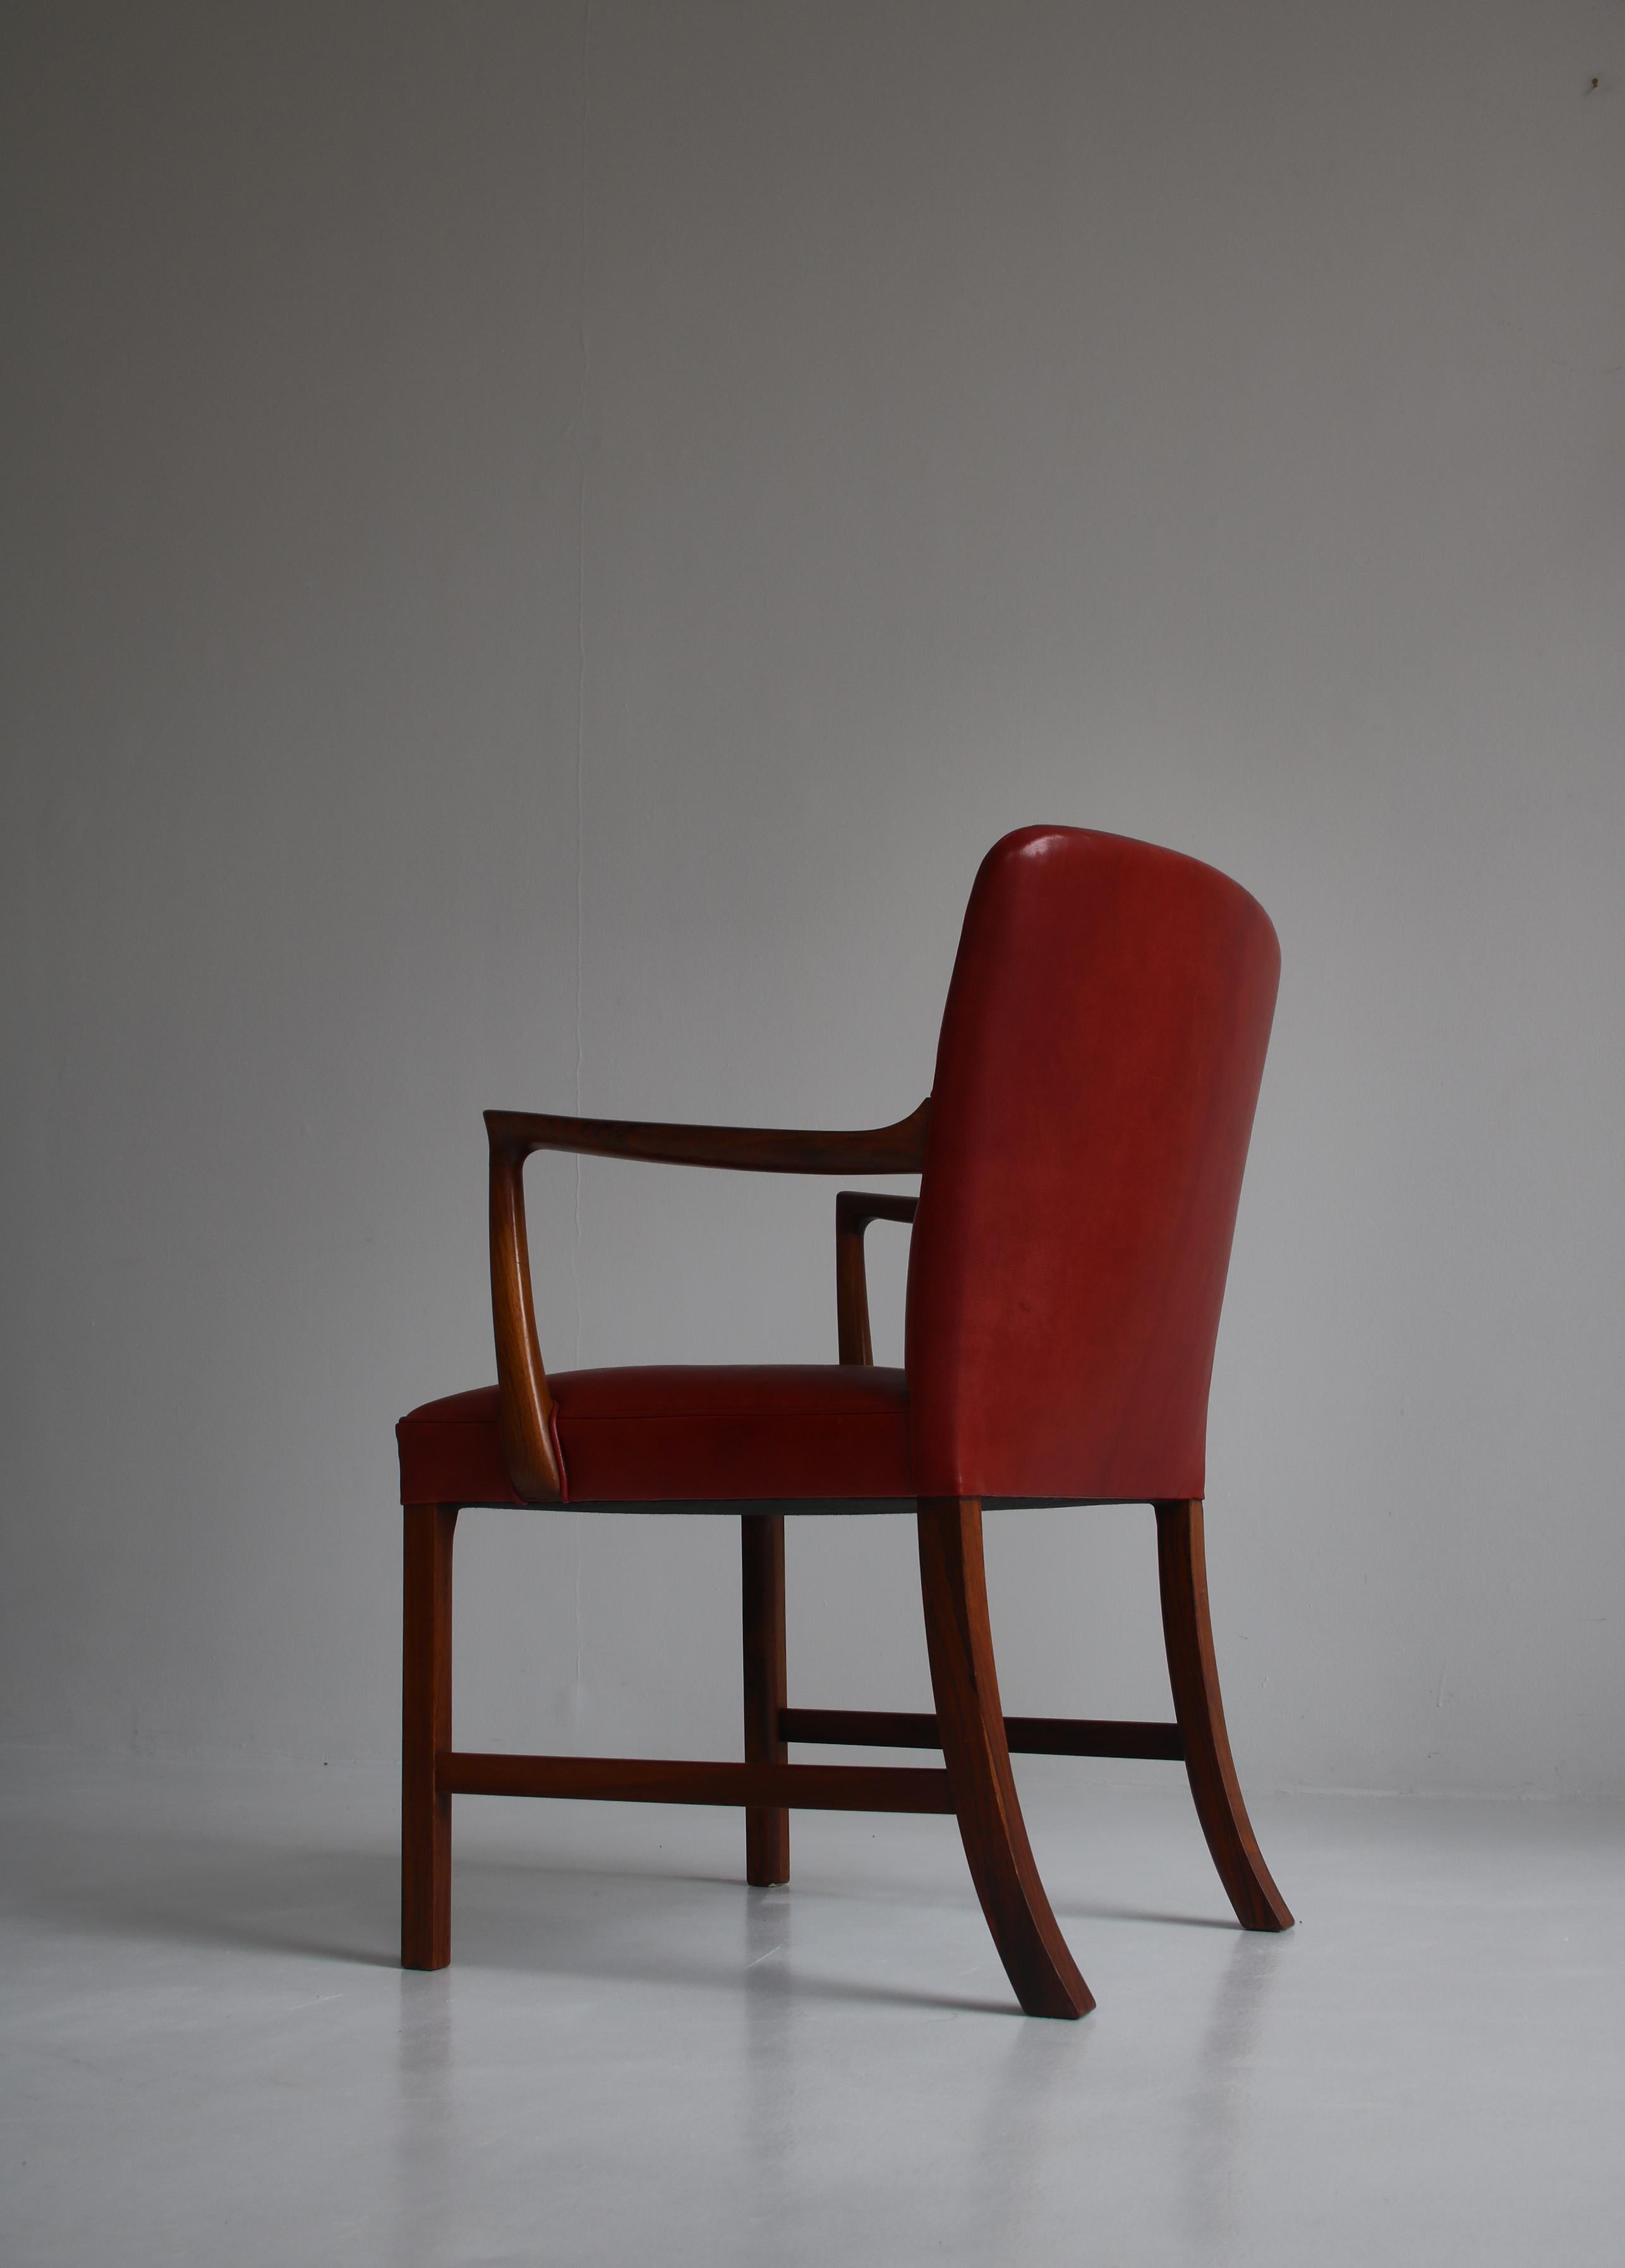 Ole Wanscher Armchair Model J 3063 by Cabinetmaker A. J. Iversen, Denmark, 1960s In Good Condition For Sale In Odense, DK